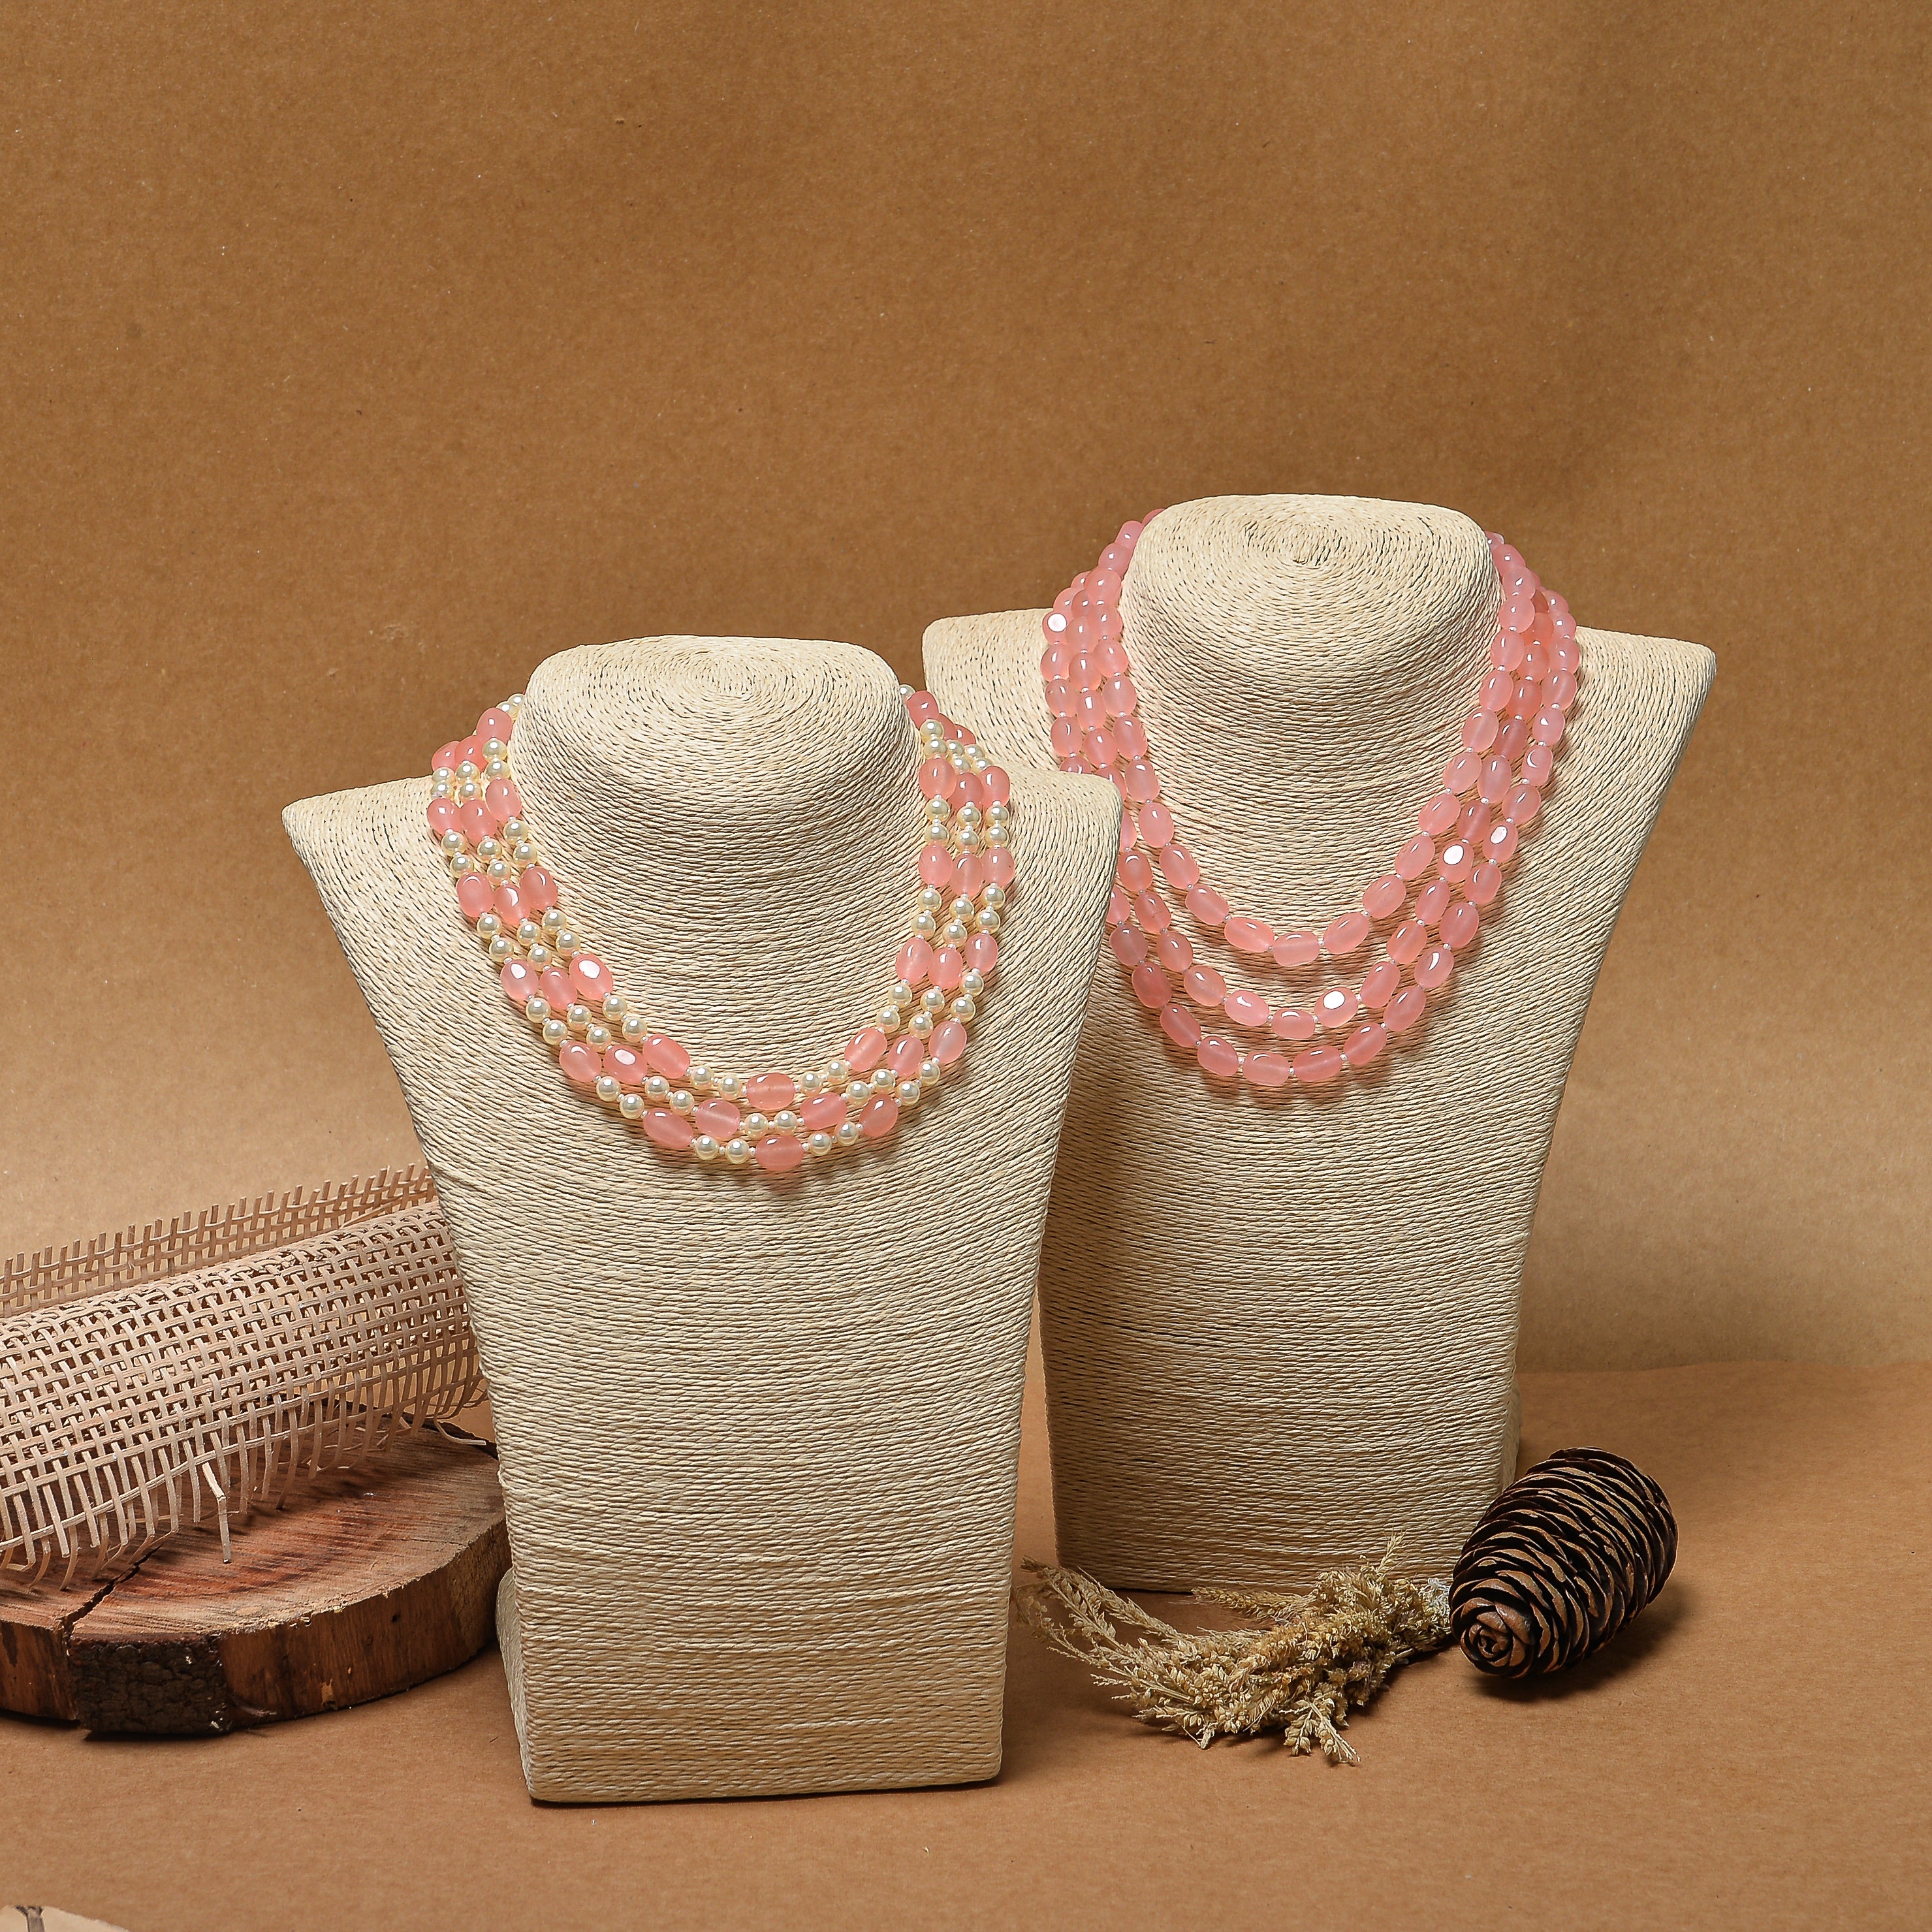 Stone and Pearl Necklace